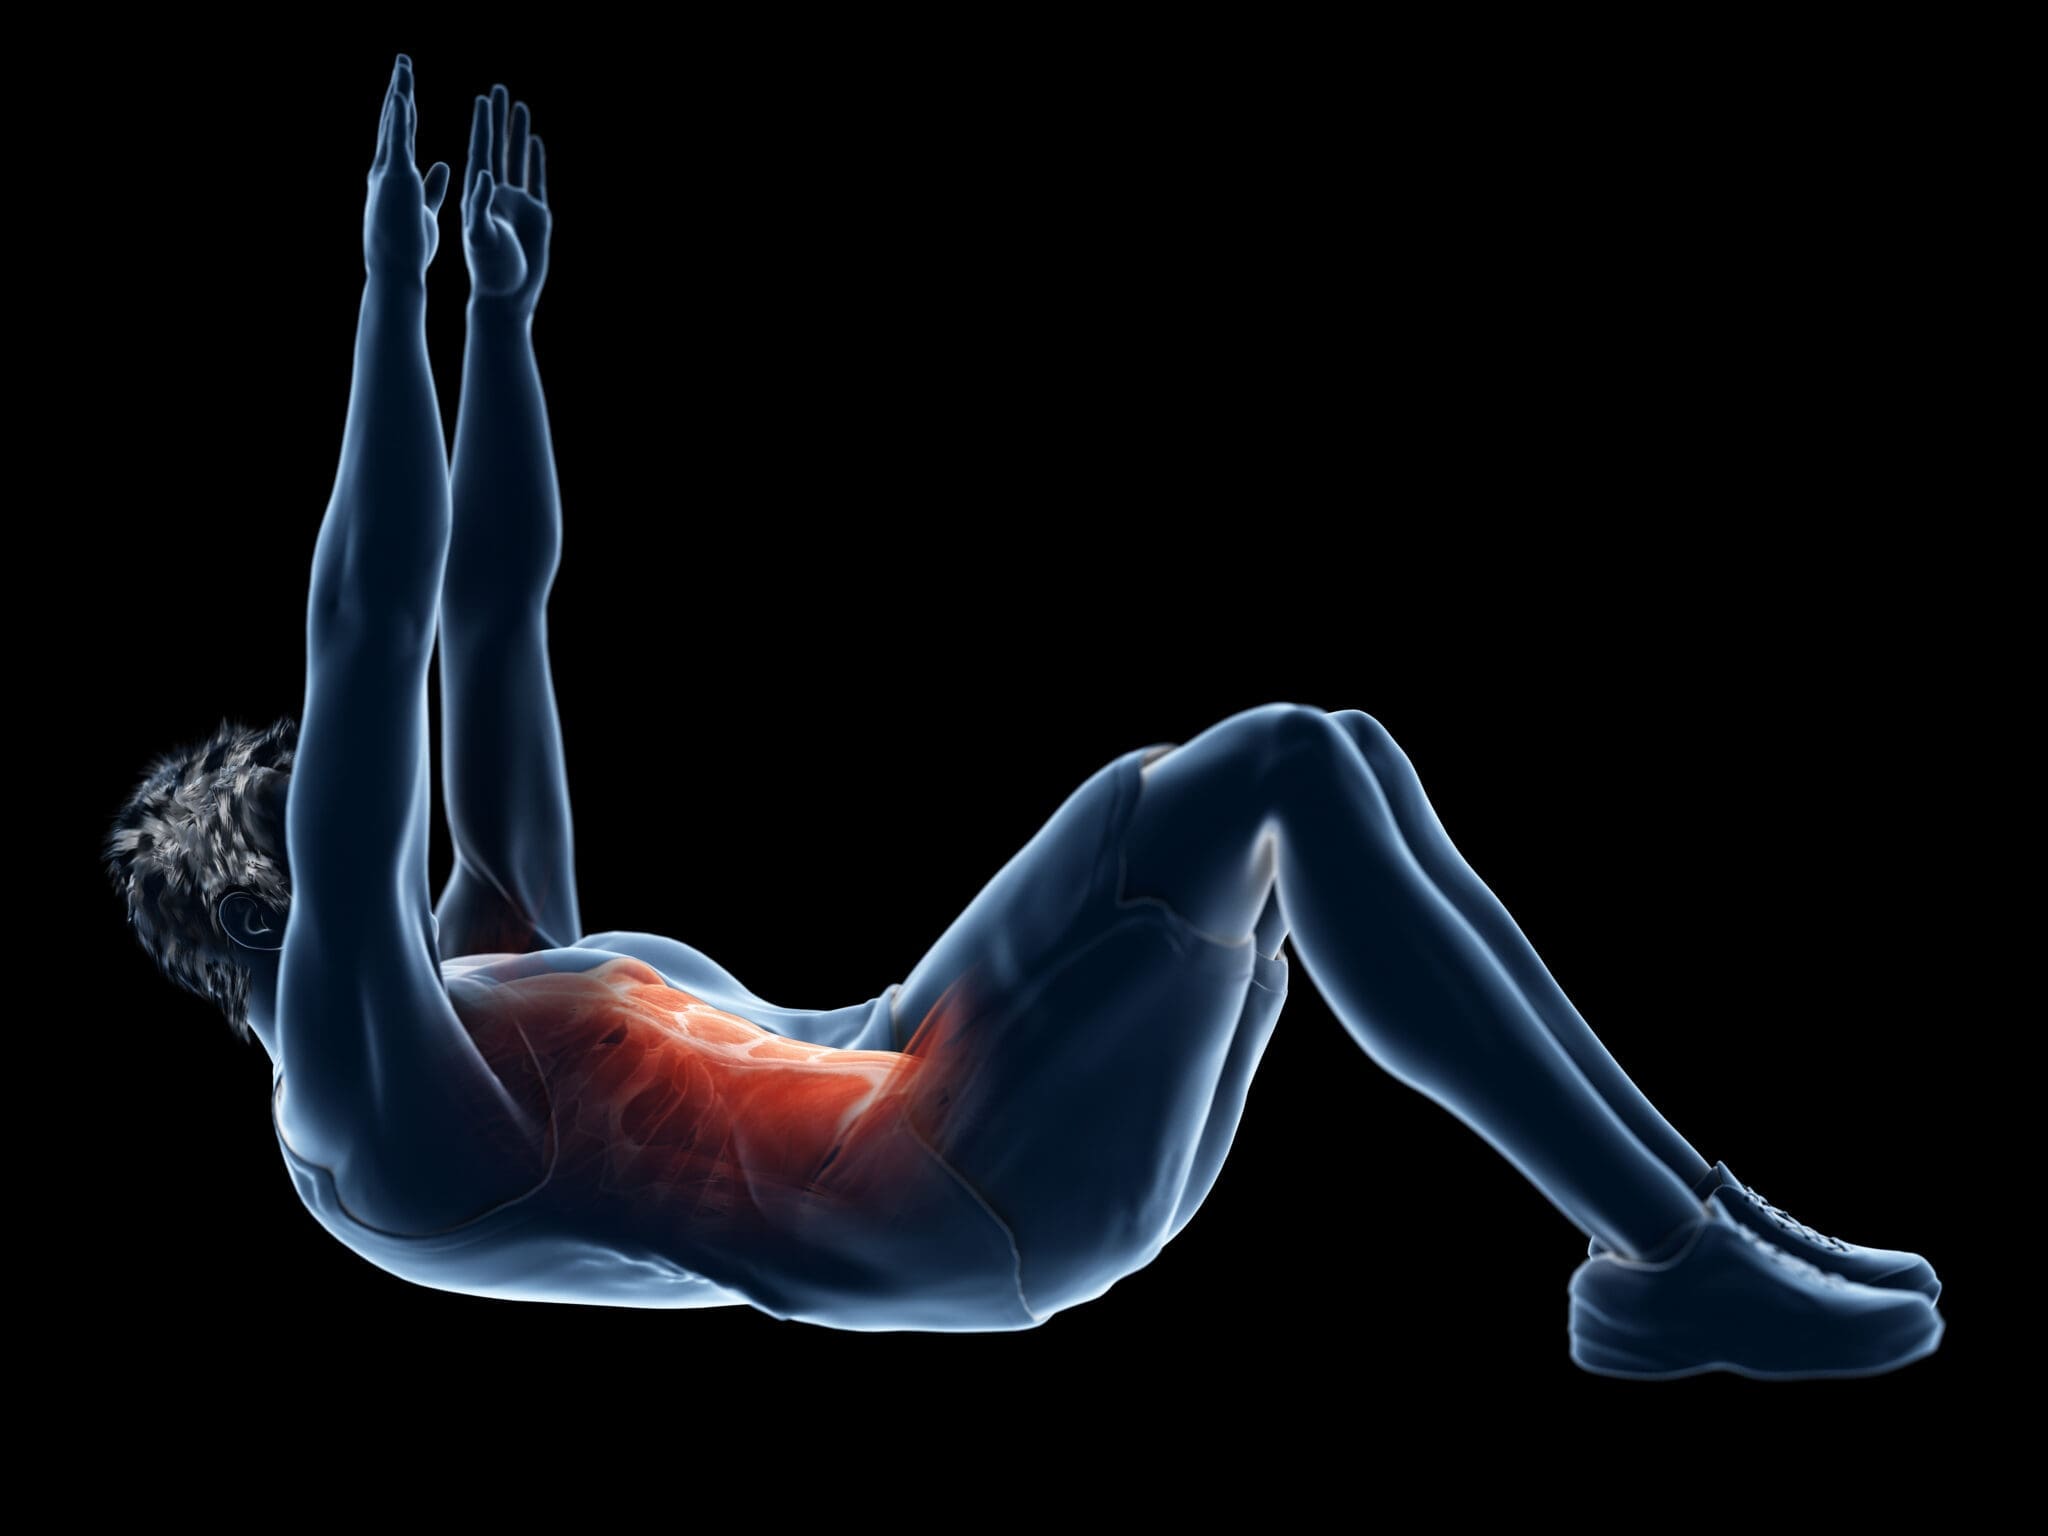 Kinesiology thursday - crunches and leg lifts